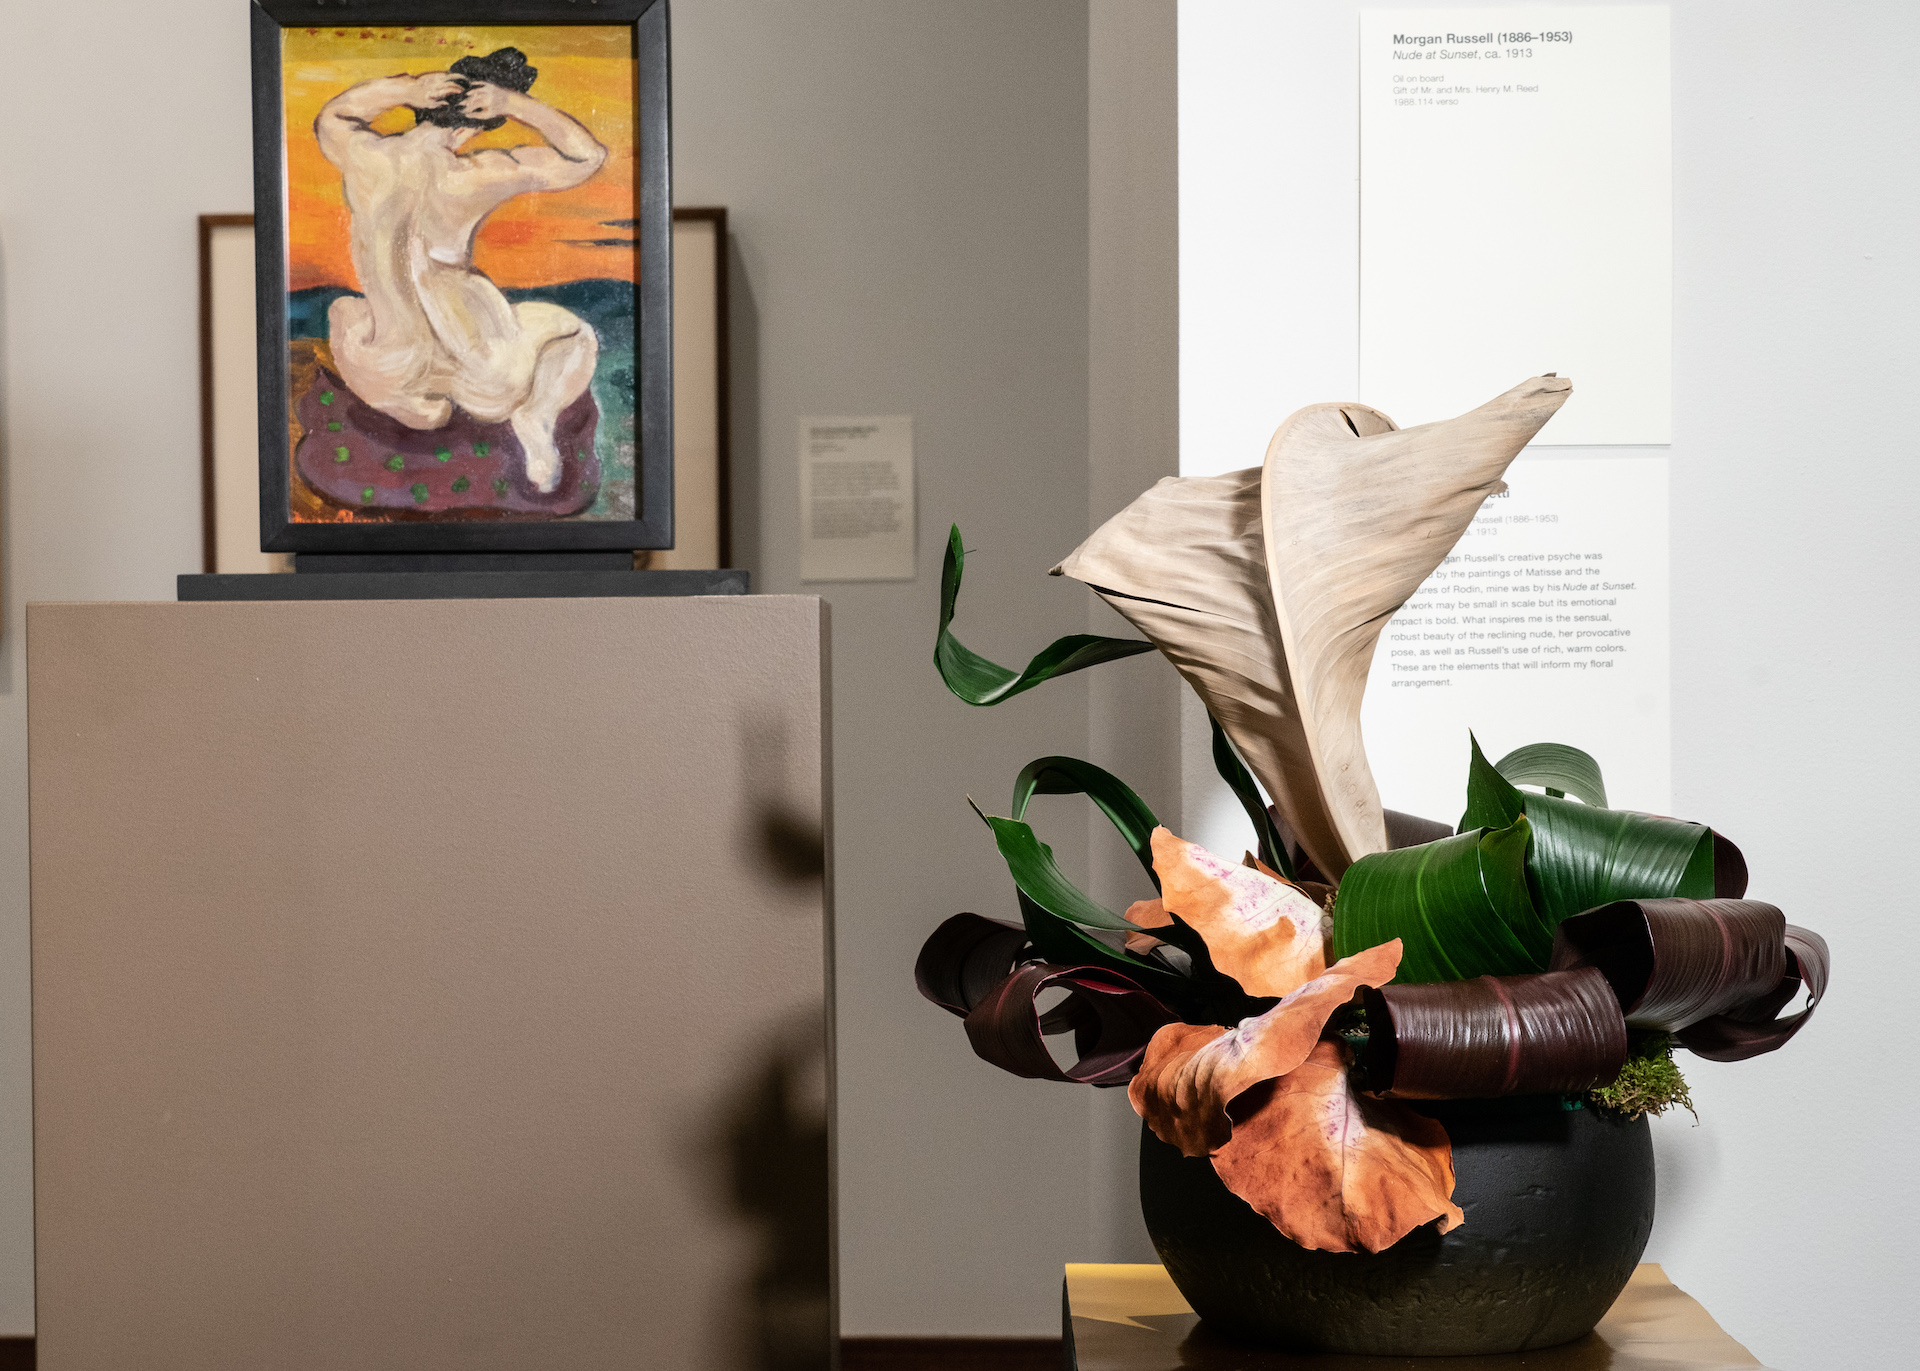 A sculptural floral arrangement in front of the artwork that inspired it in the gallery.